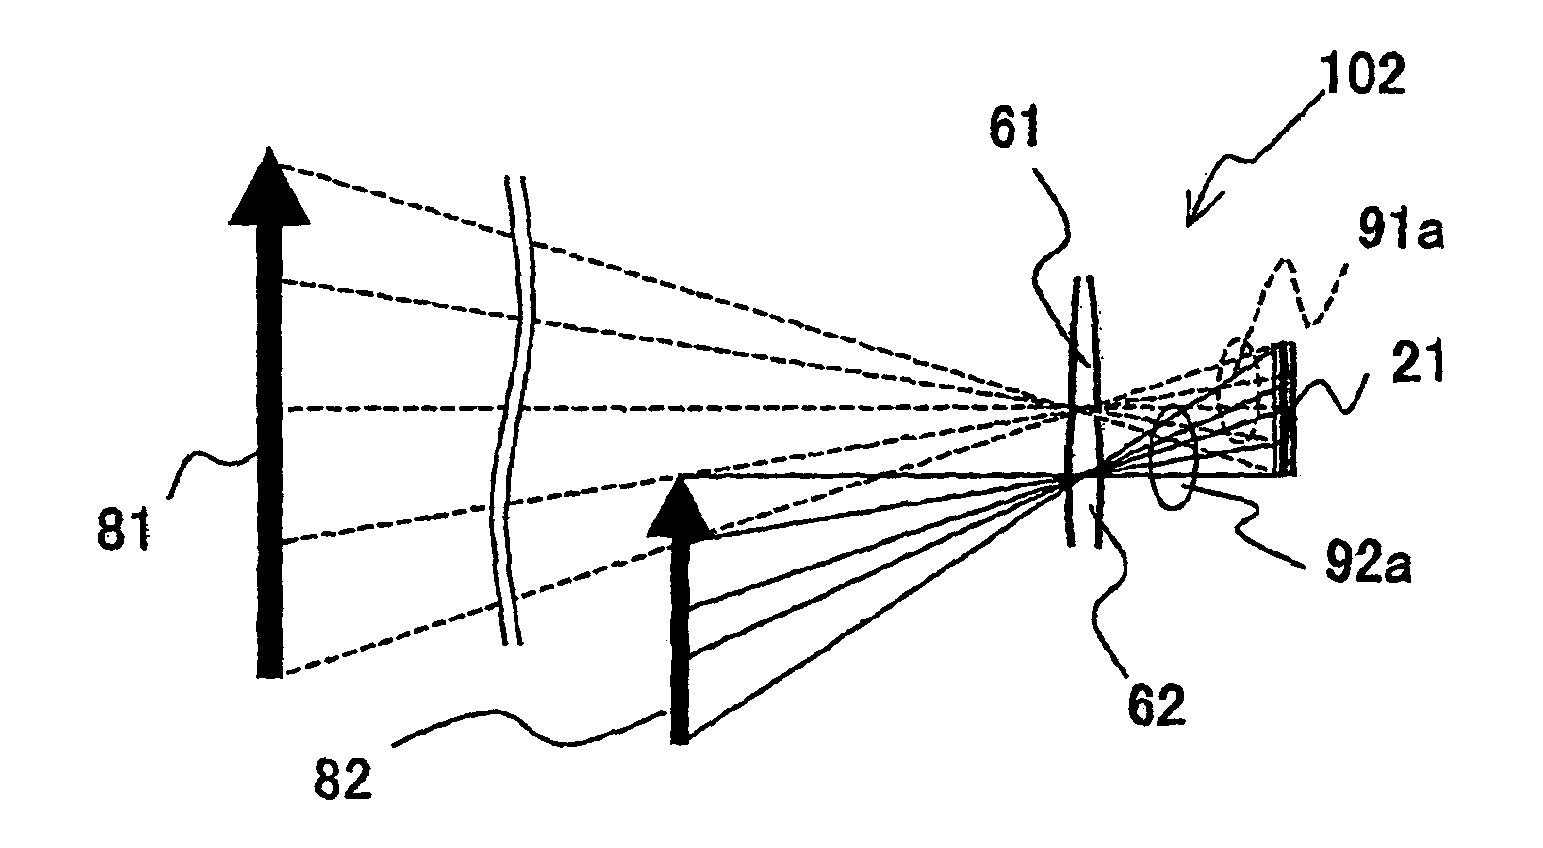 Imaging apparatus with a multifocal lens formed of two pieces with different focal lengths